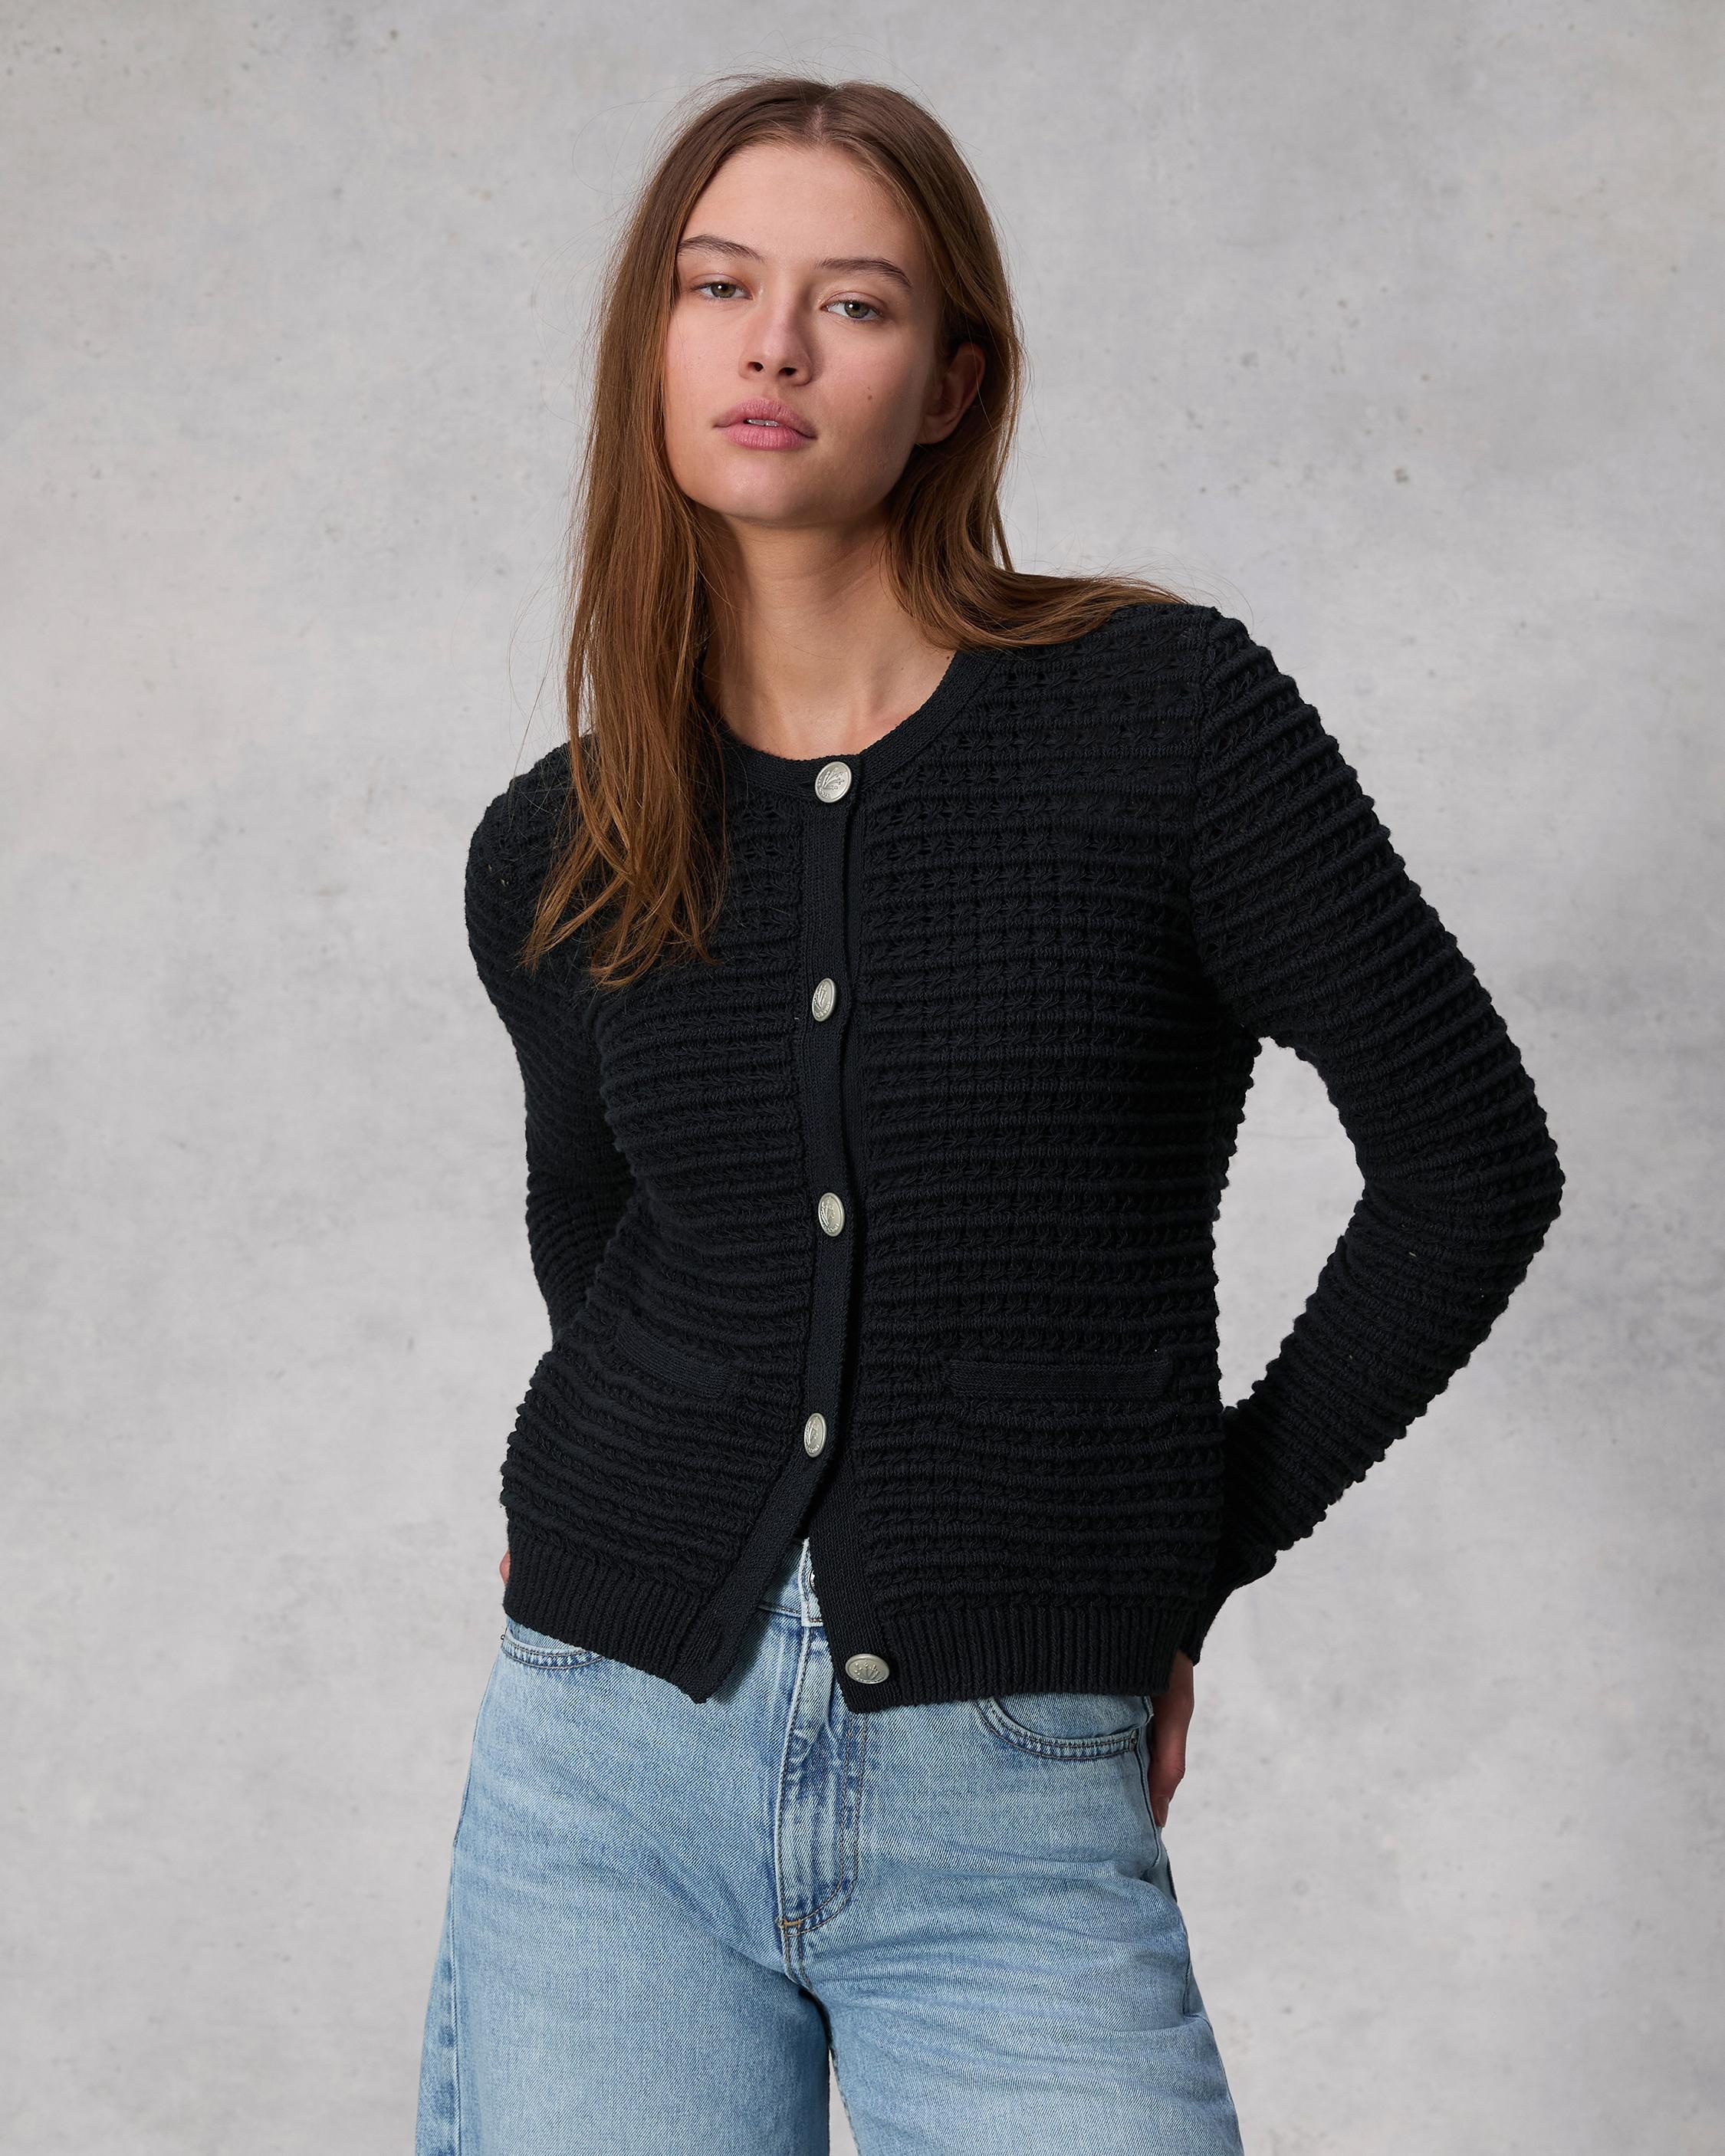 Marlee Cotton Cardigan
Relaxed Fit - 2